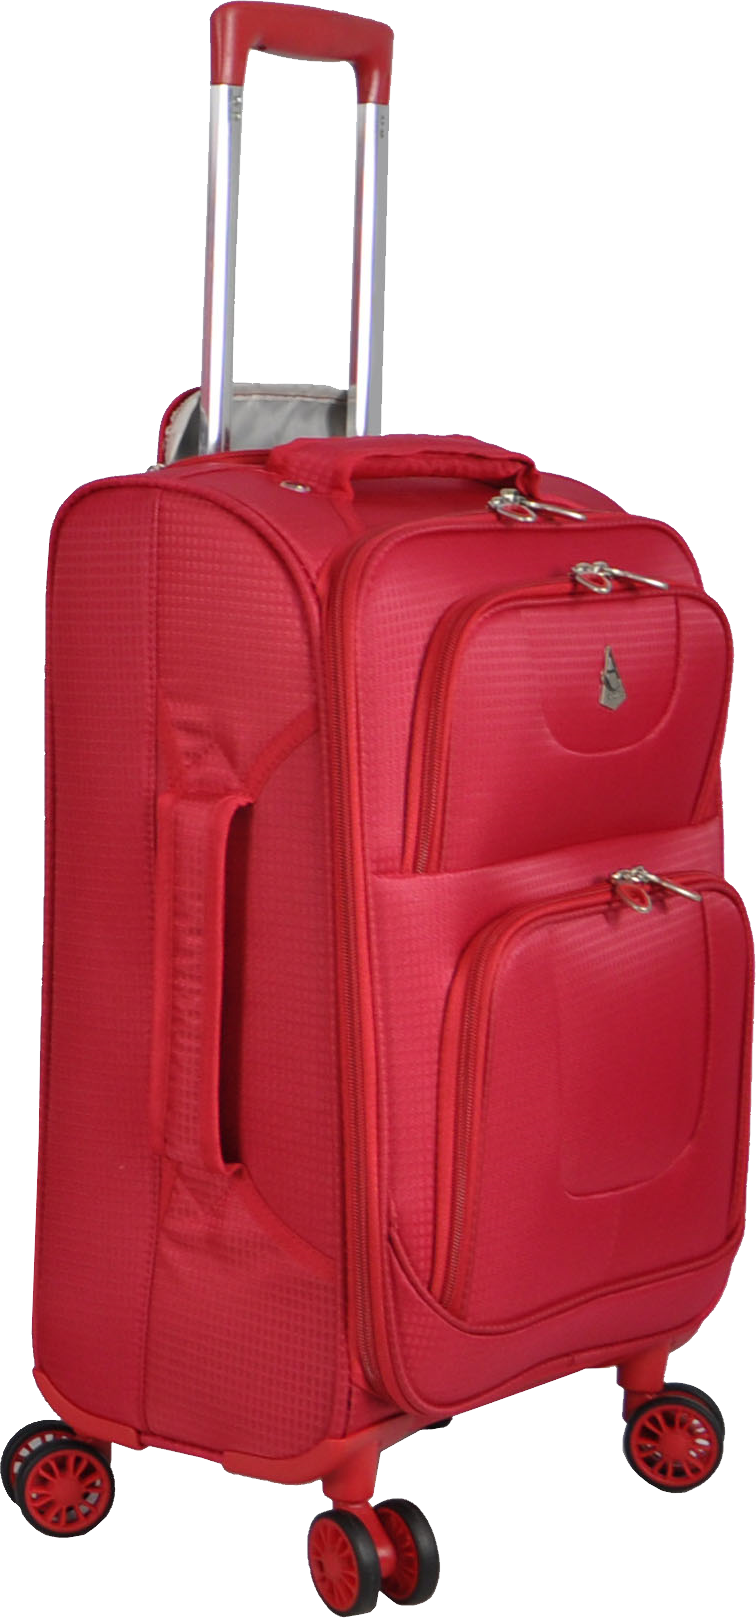 Pink clipart briefcase. Luggage suitcase png images